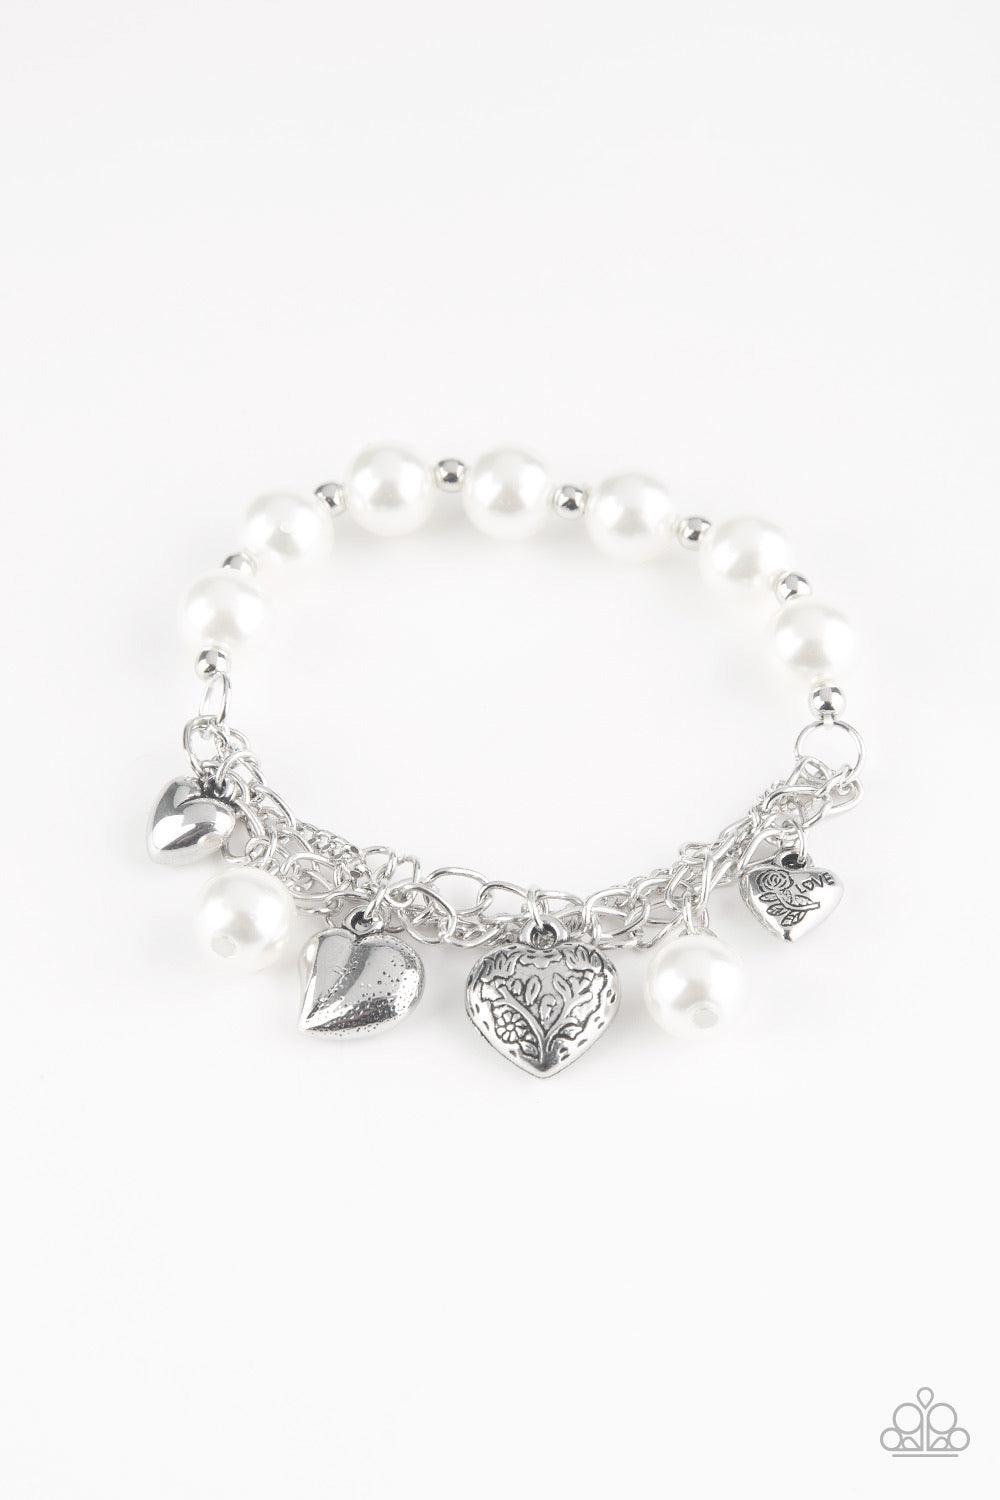 Paparazzi Accessories More Amour - White Attached to a section of shimmery silver chain, pearly white and dainty silver beads are threaded along a stretchy band. Mismatched silver heart charms swing from the glistening chain, creating a flirty fringe. Jew